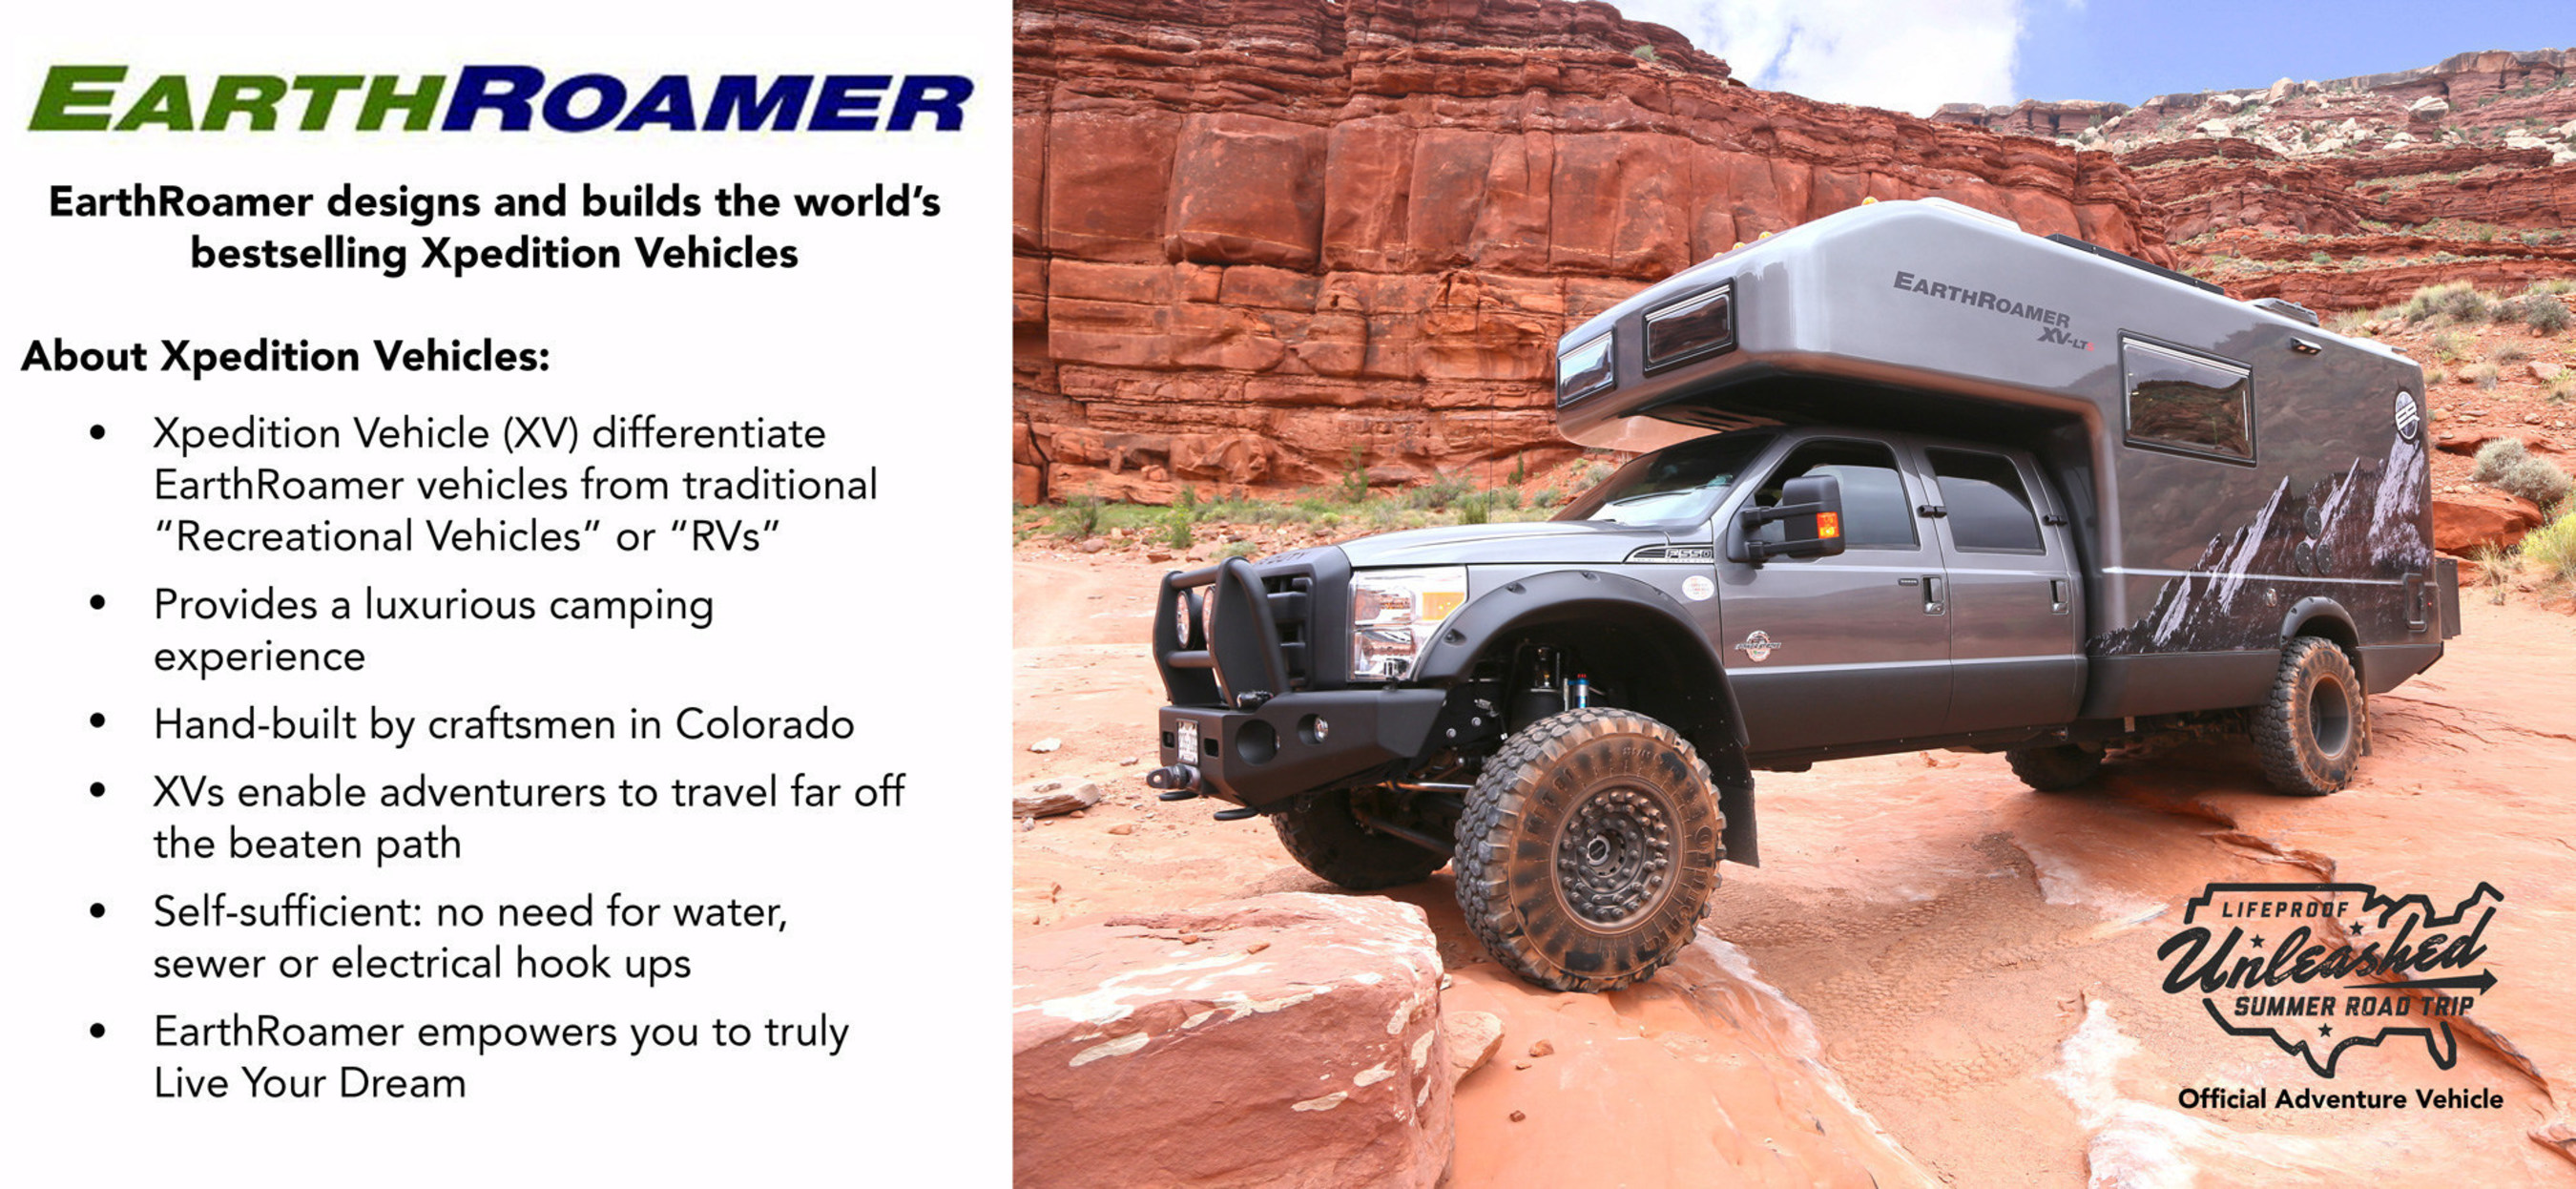 EarthRoamer Xpedition Vehicle is the official vehicle of the LifeProof Unleashed Summer Road Trip.